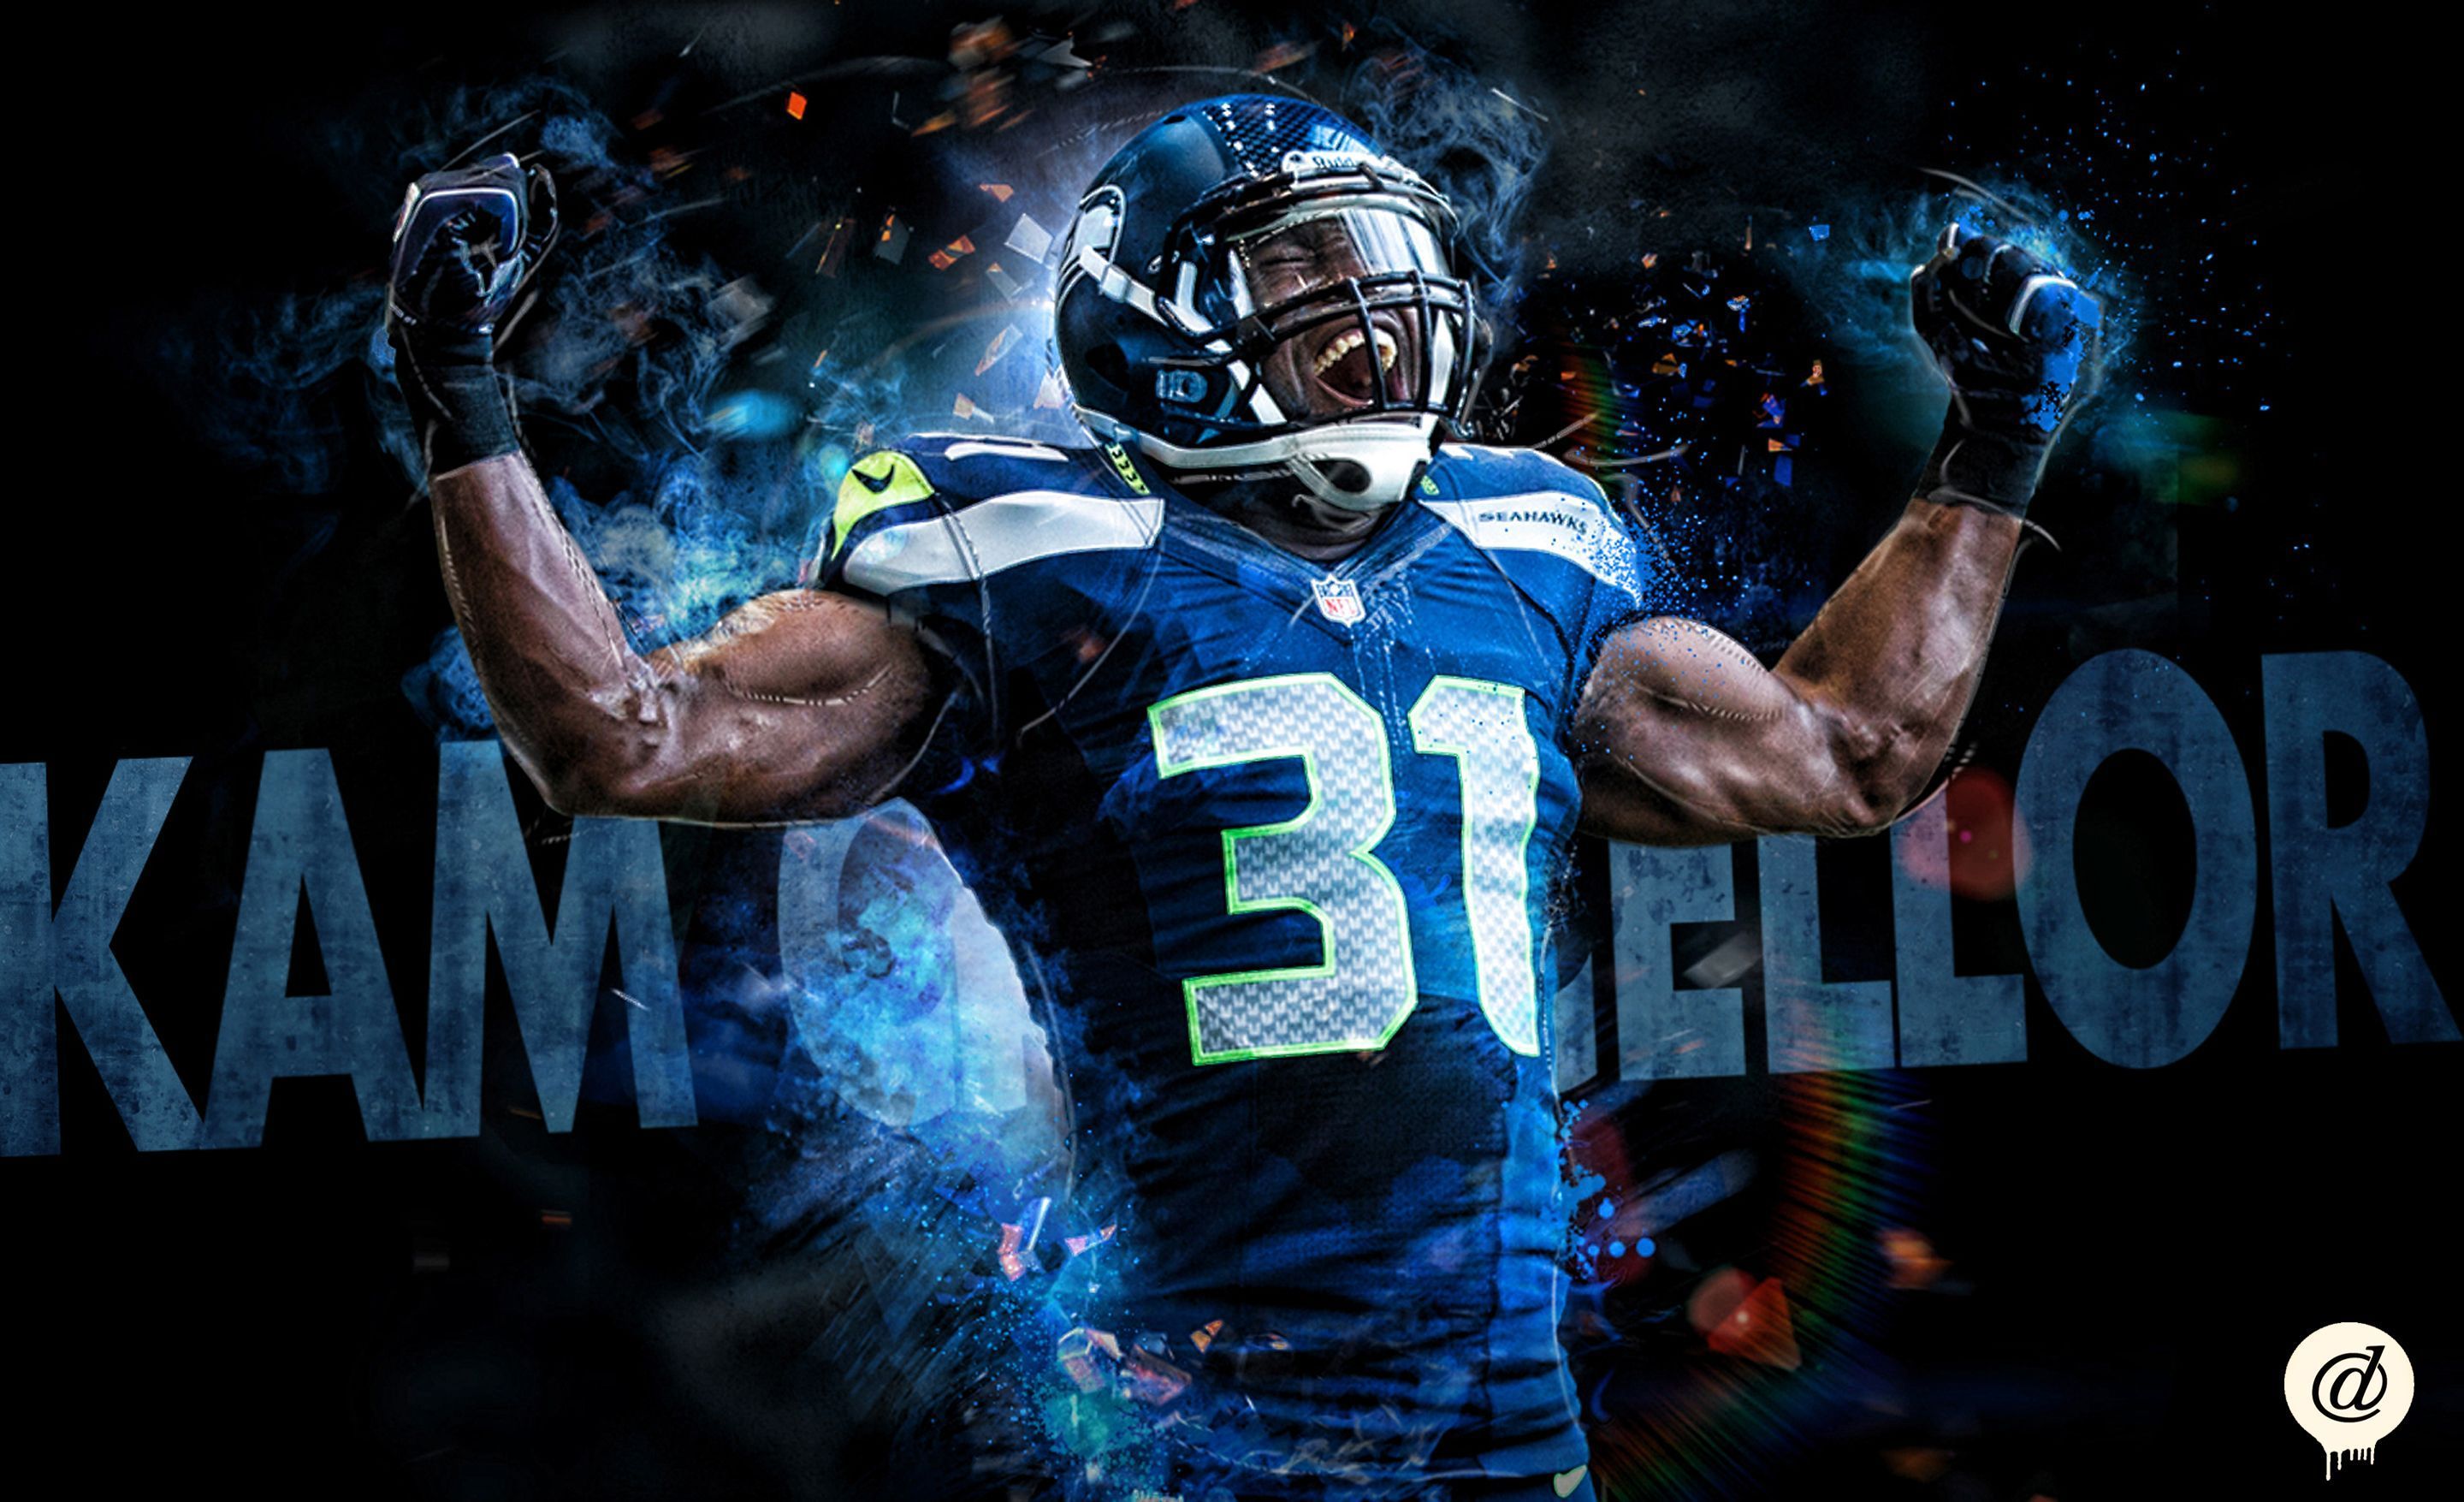 Player is Happy about the Victory on NFL Wallpapers #4234104 ...